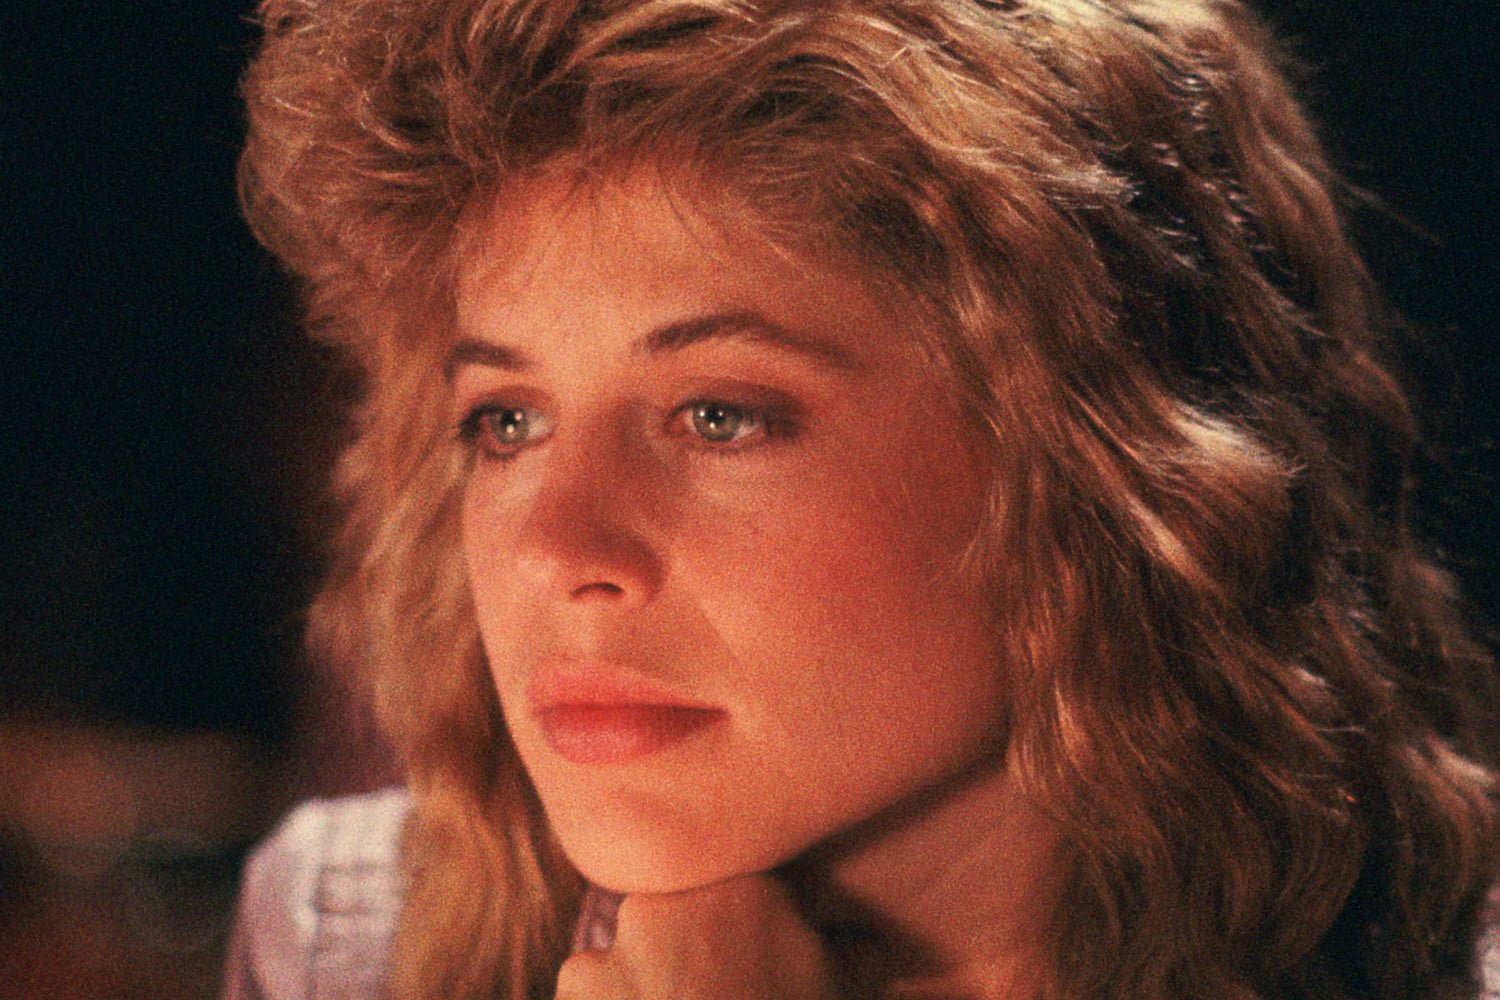 Happy birthday to a terrific actress of the big and small screens, Emmy nominee Linda Hamilton! 